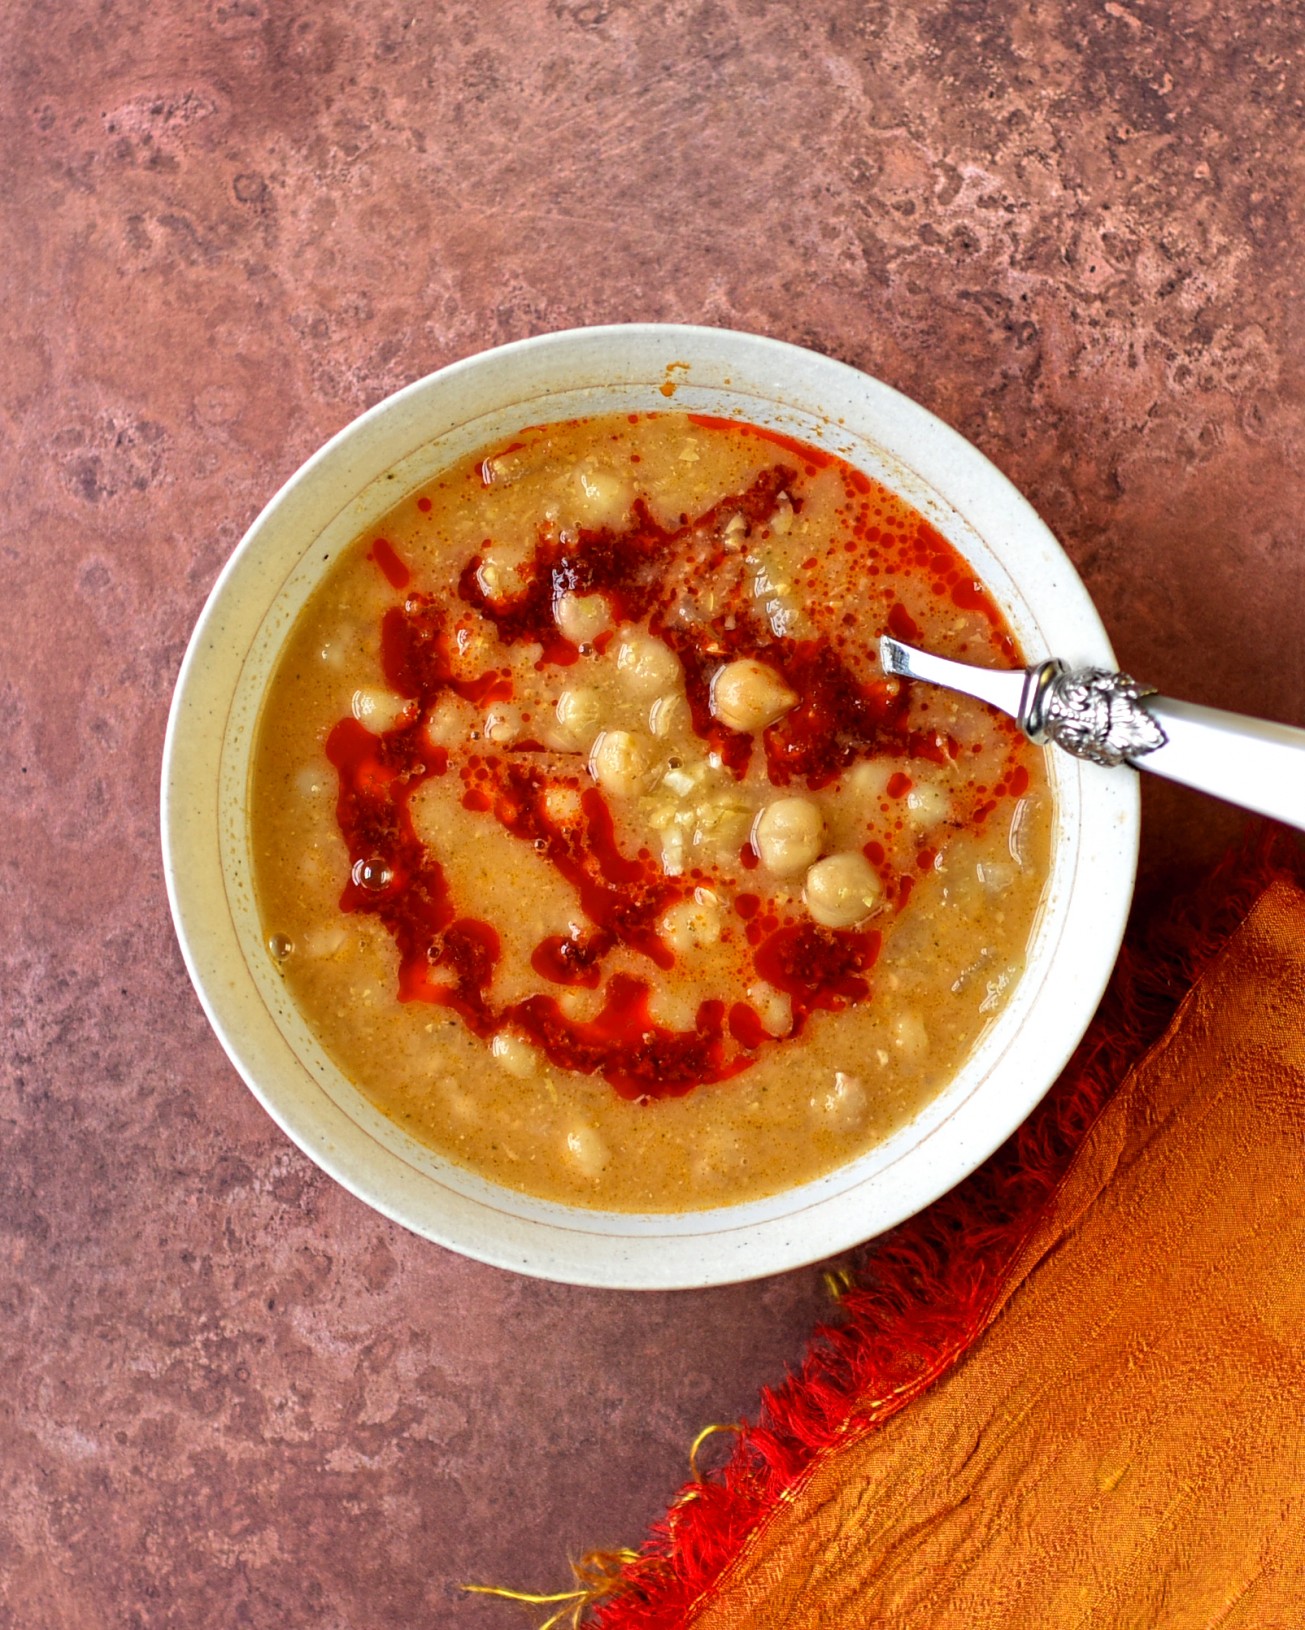 Tunisian-style chickpea soup with harissa oil